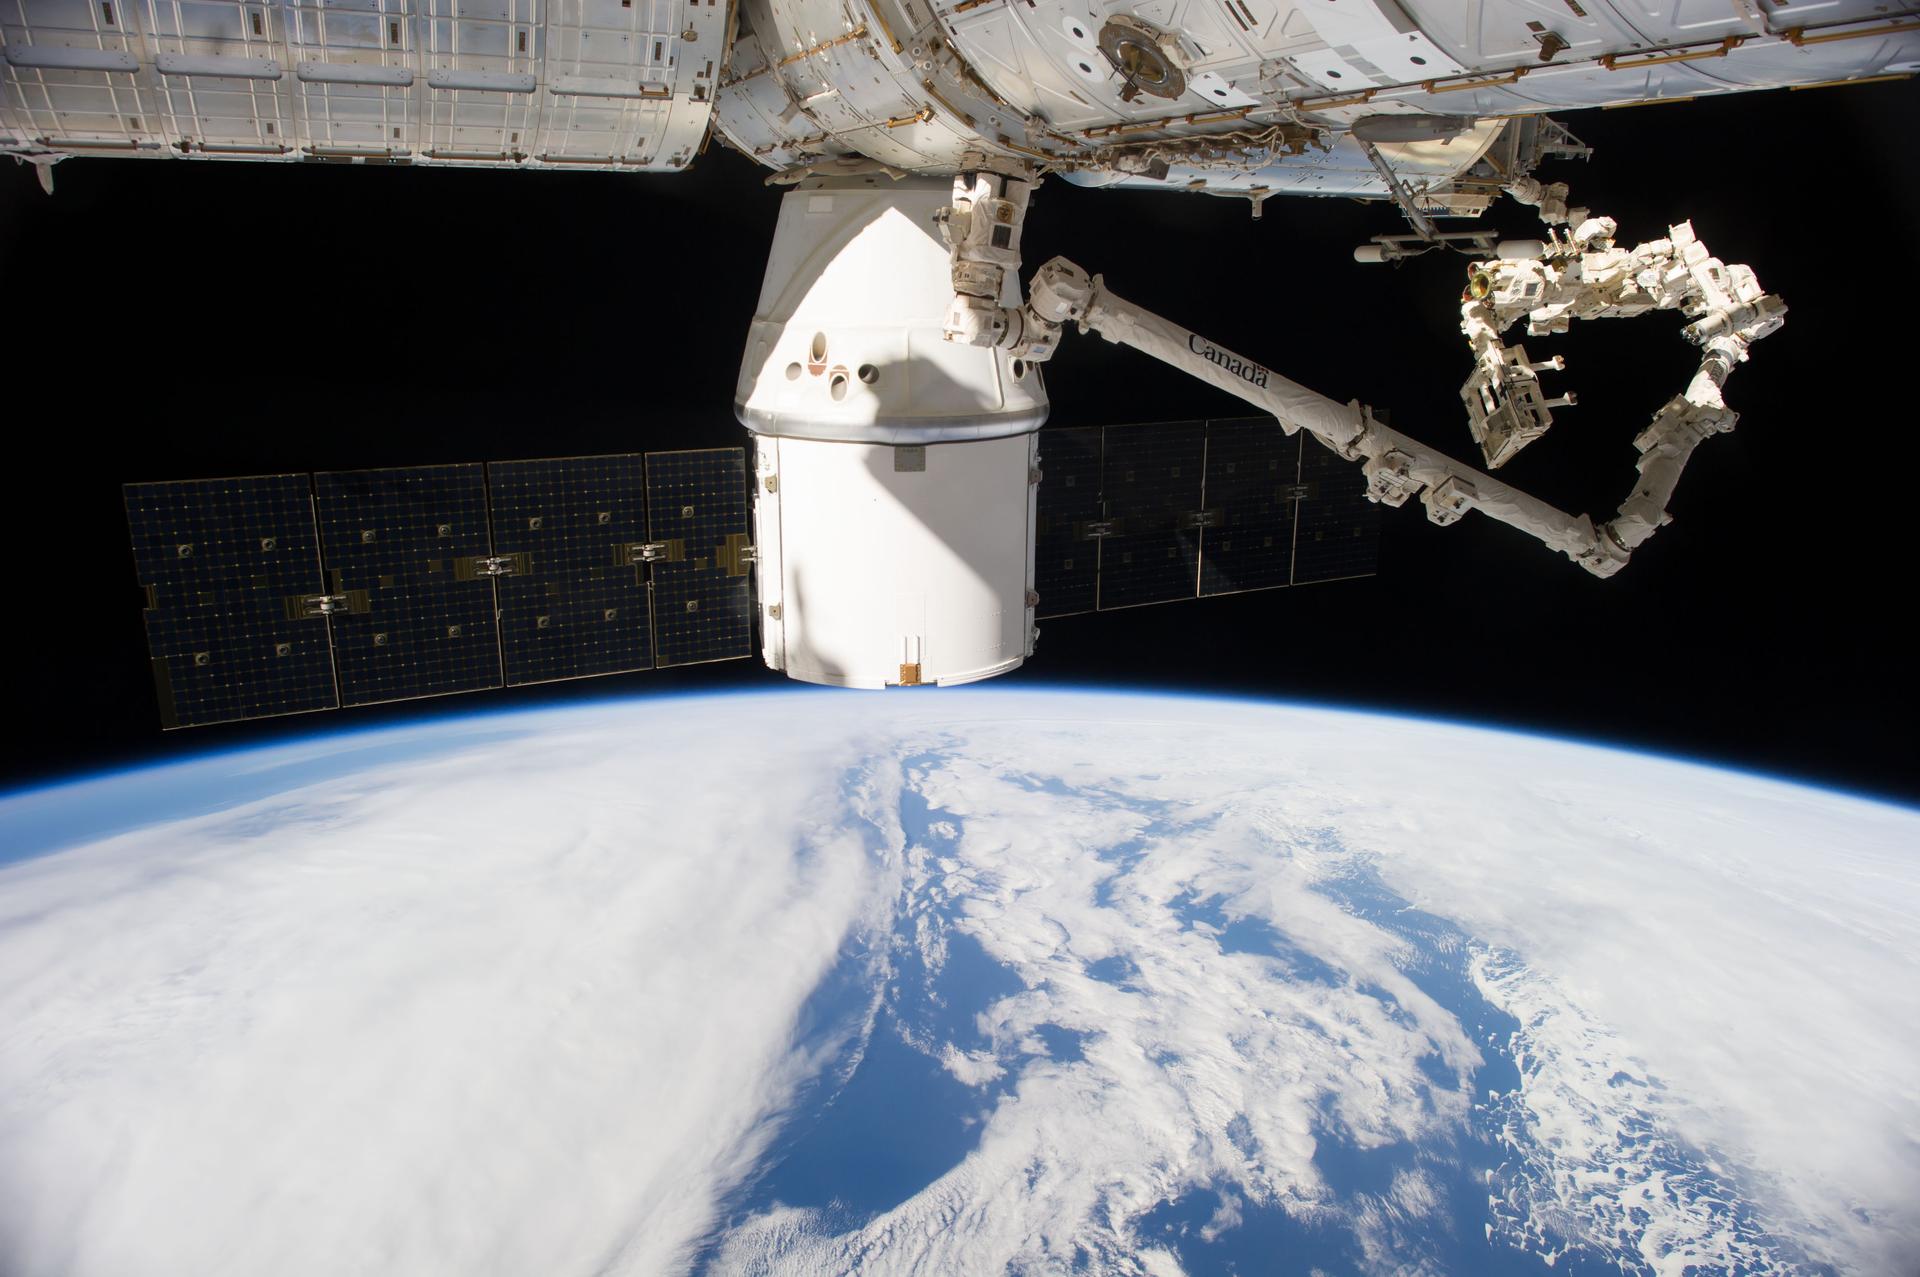 A SpaceX Dragonbound for the International Space Station is targeted to launch on a Falcon 9 rocket 